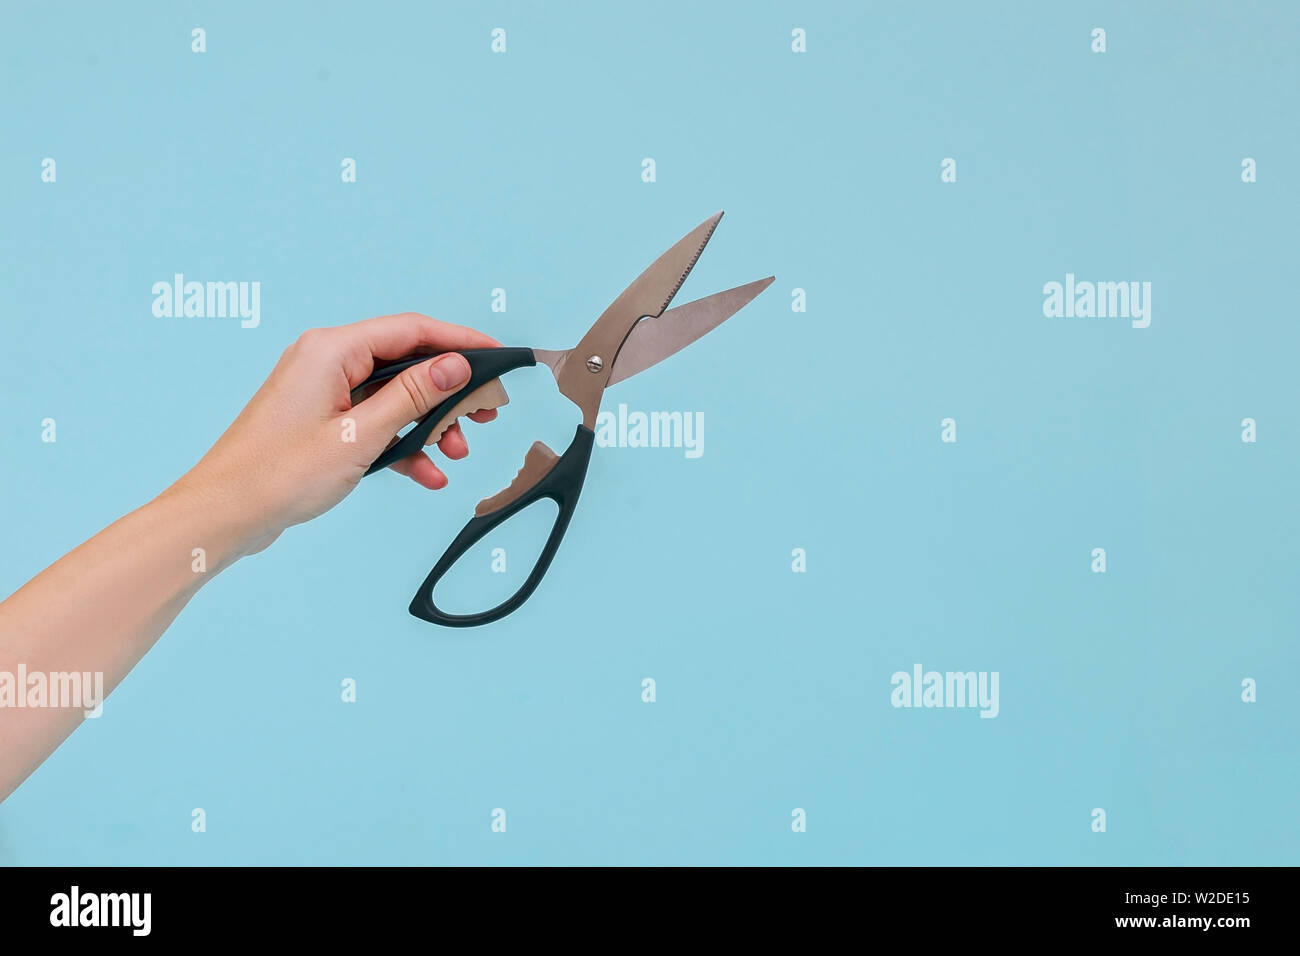 Woman's hand holding the scissors on blue background. Stock Photo